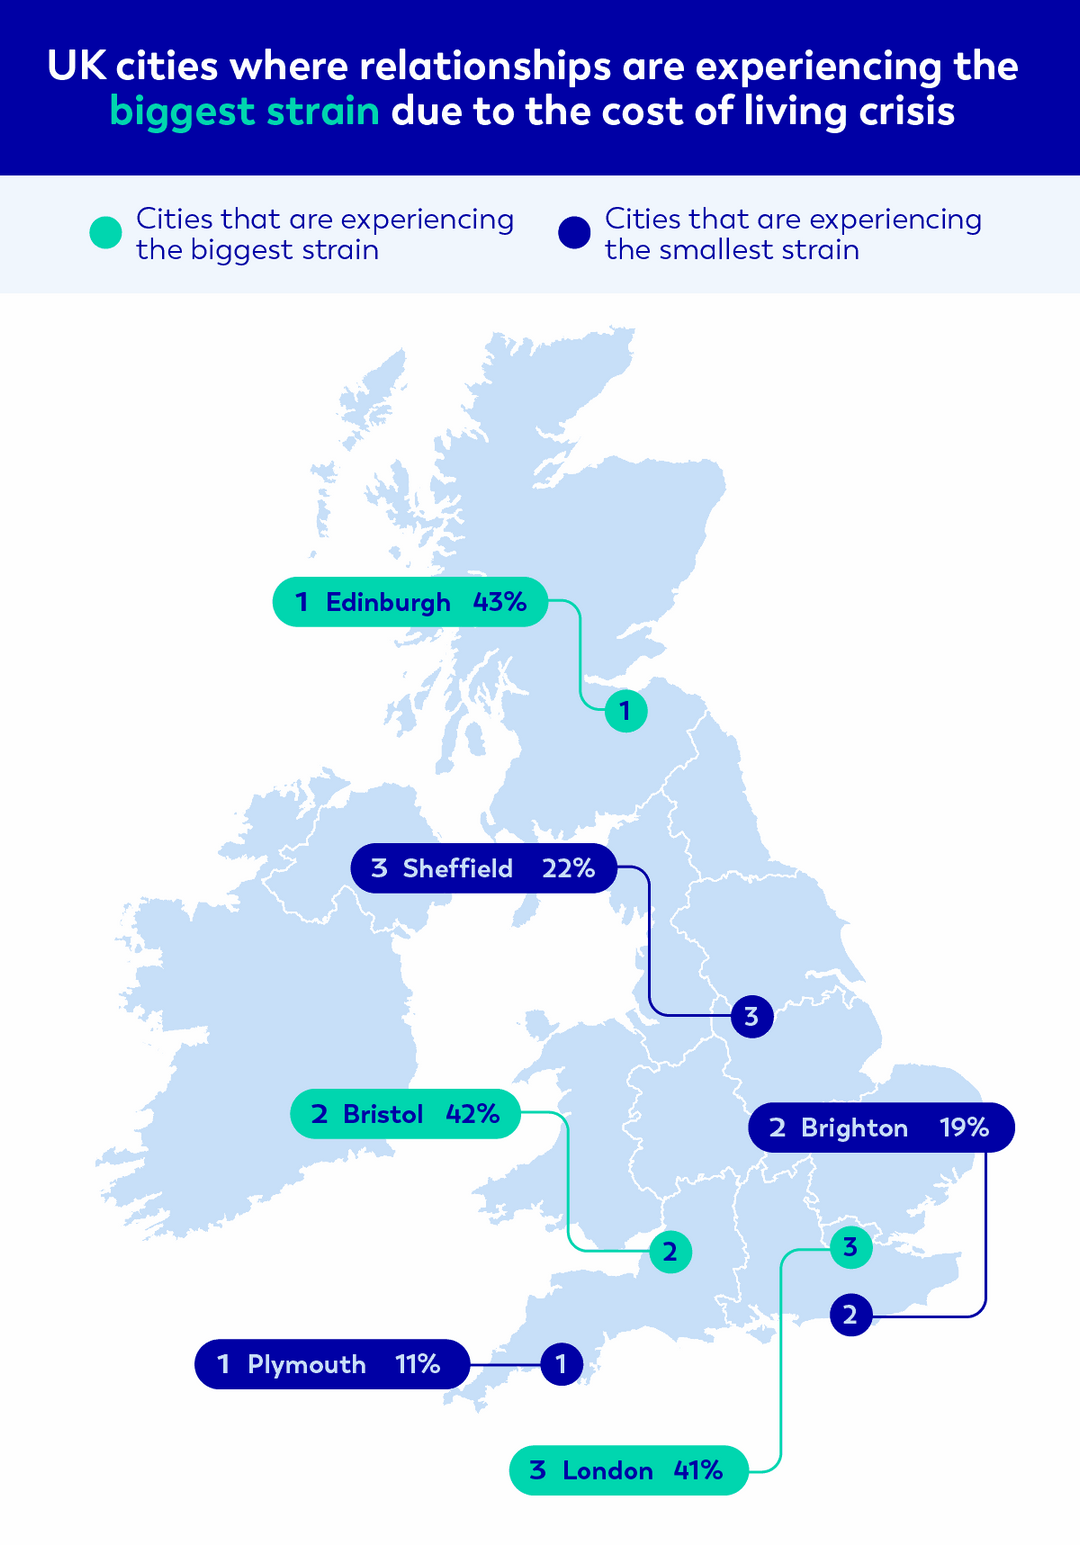 Cities experiencing the largest strain 1. Edinburgh 43% 2. Bristol 42% 3. London 41%. 

Cities experiencing the smallest strain 1. Plymouth 11% 2. Brighton 19% 3. Sheffield 22%